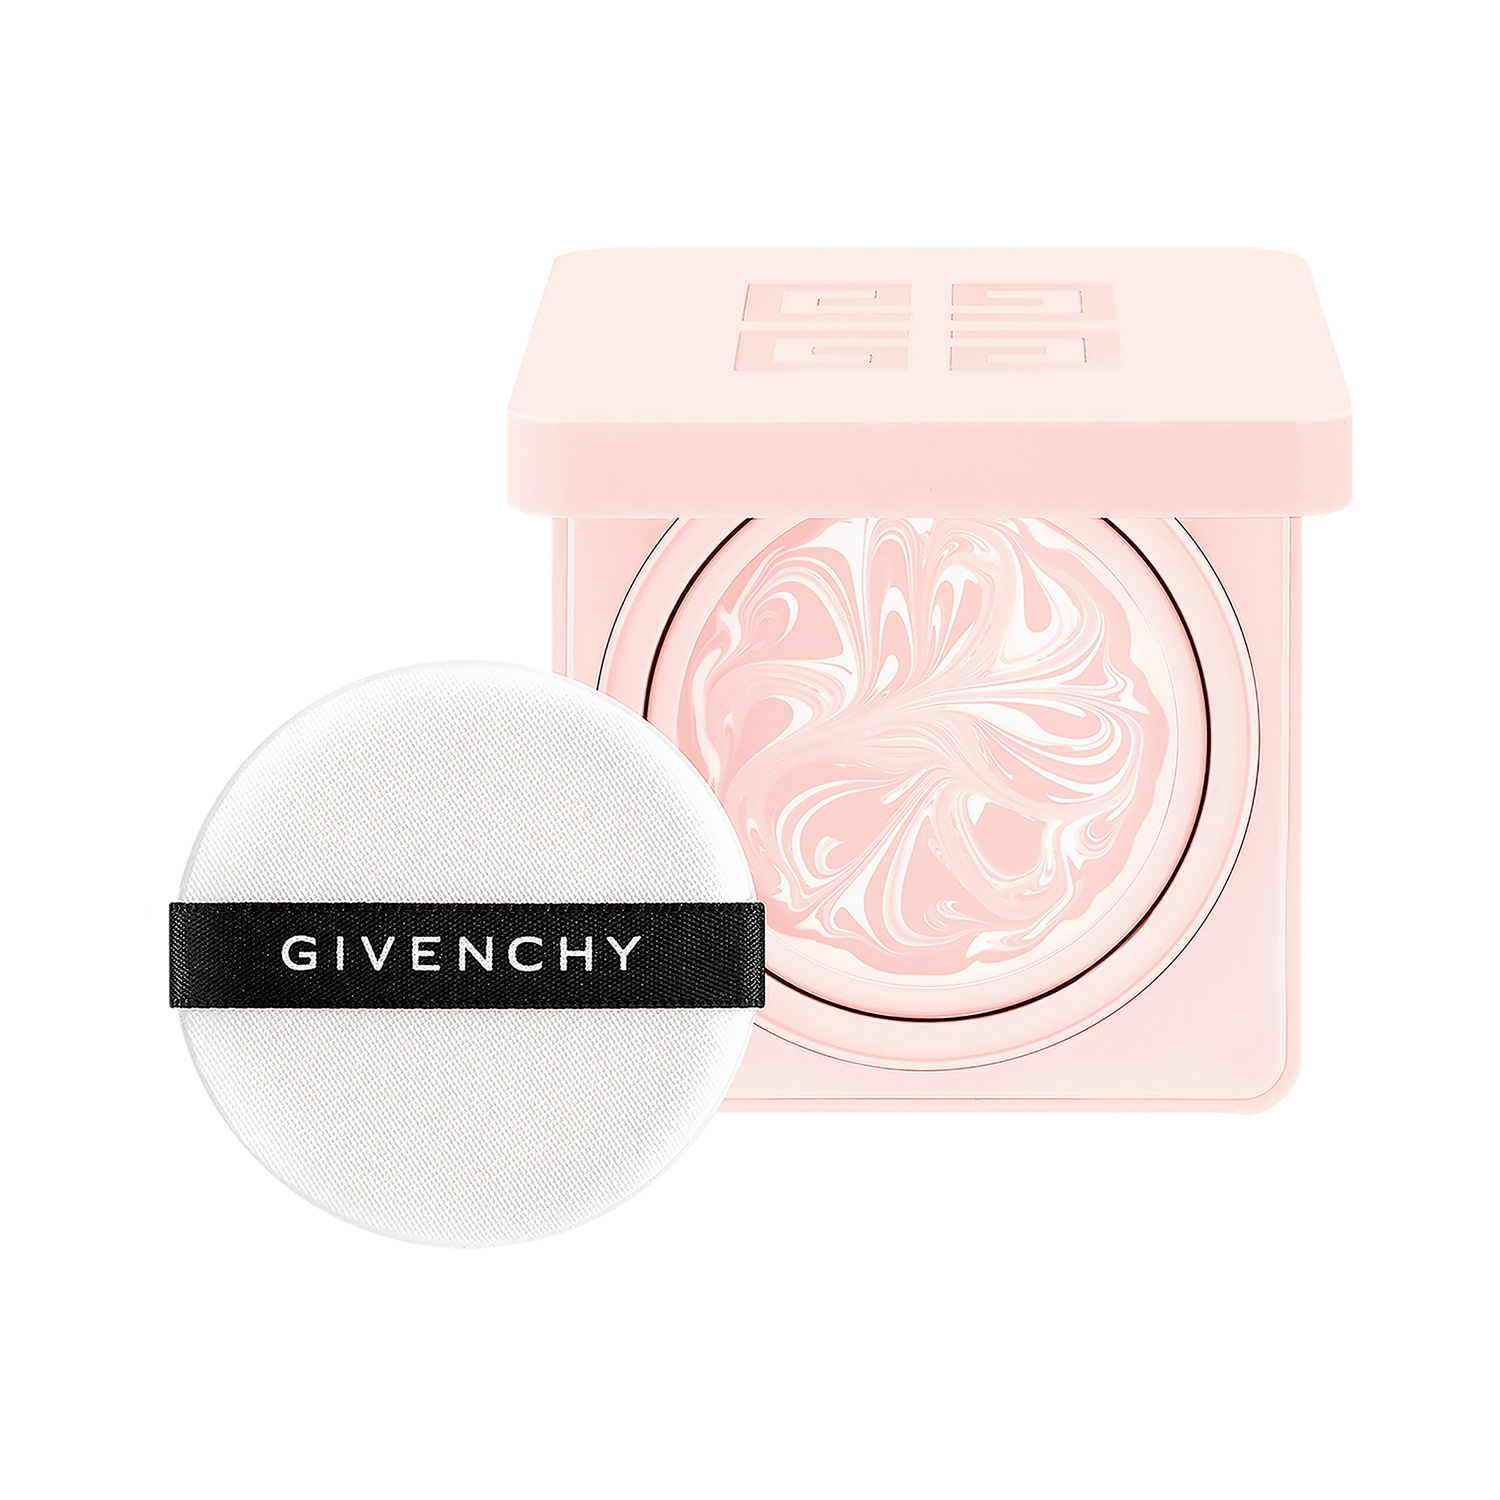 Givenchy | Givenchy Skin Perfecto Compact Cream With SPF 30 PA++ (12g)